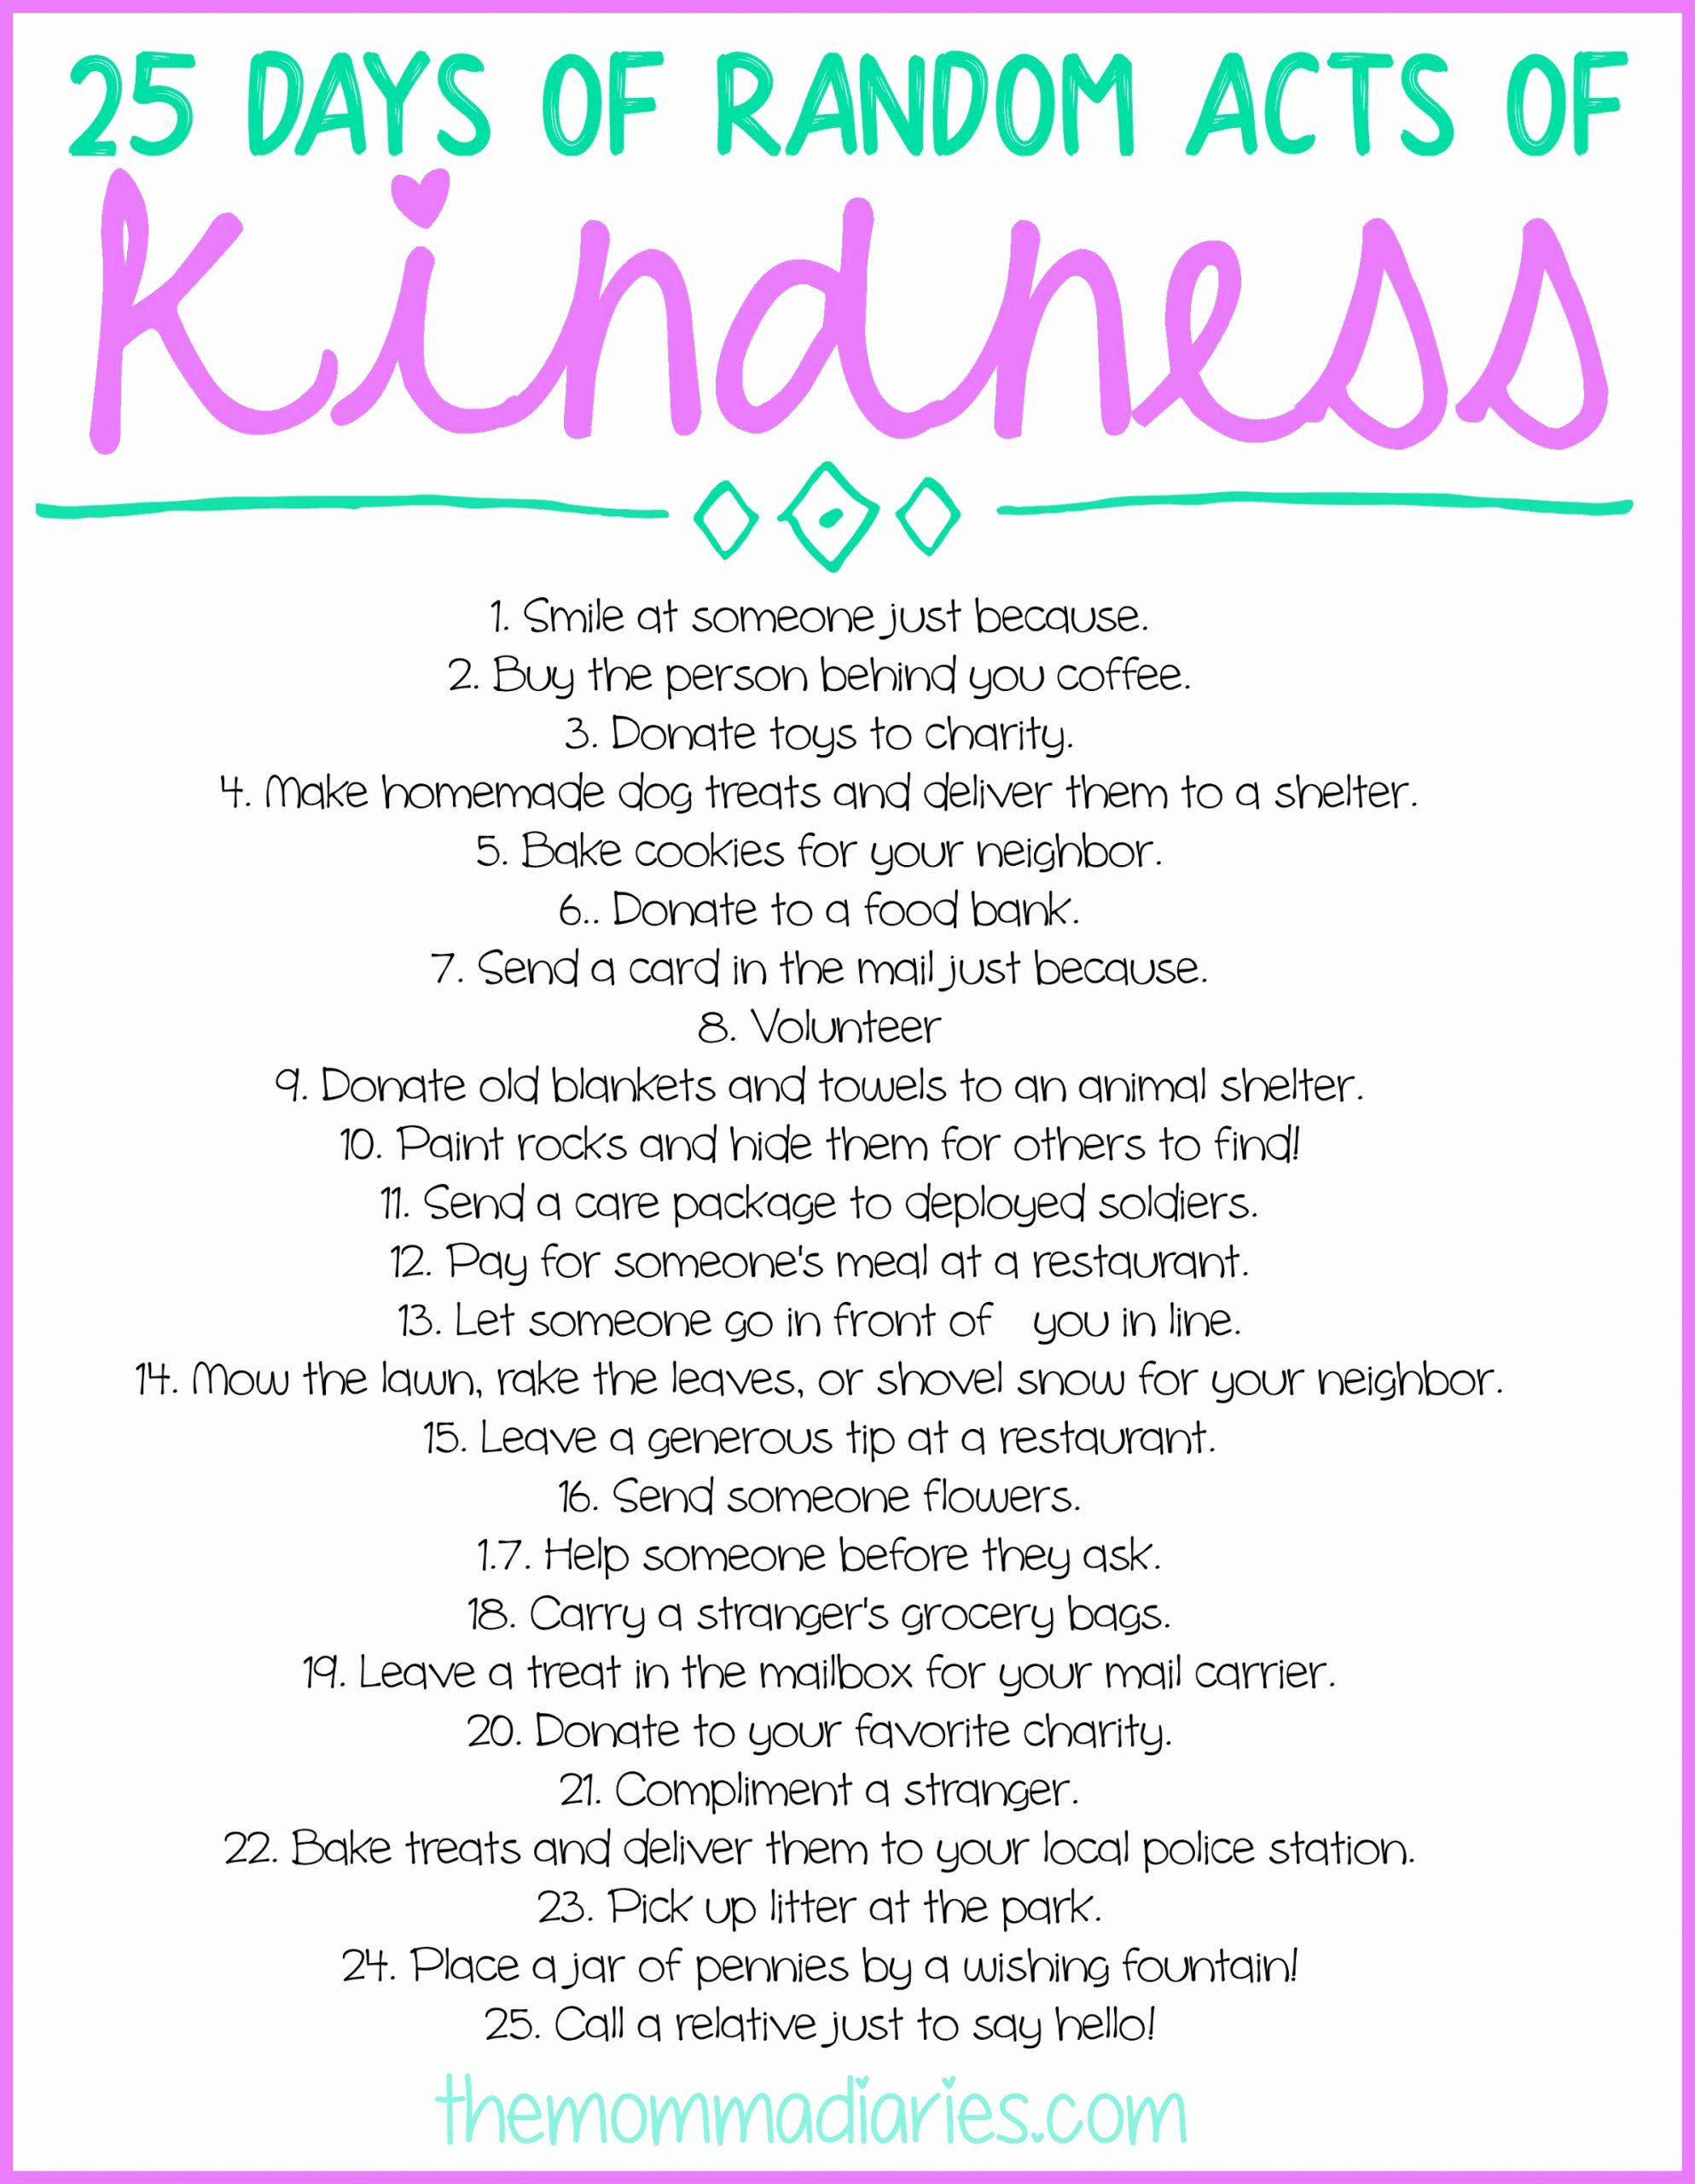 Random Acts Of Kindness Worksheets Inspirational 25 Days Of Random Acts Of Kindness Free Printables